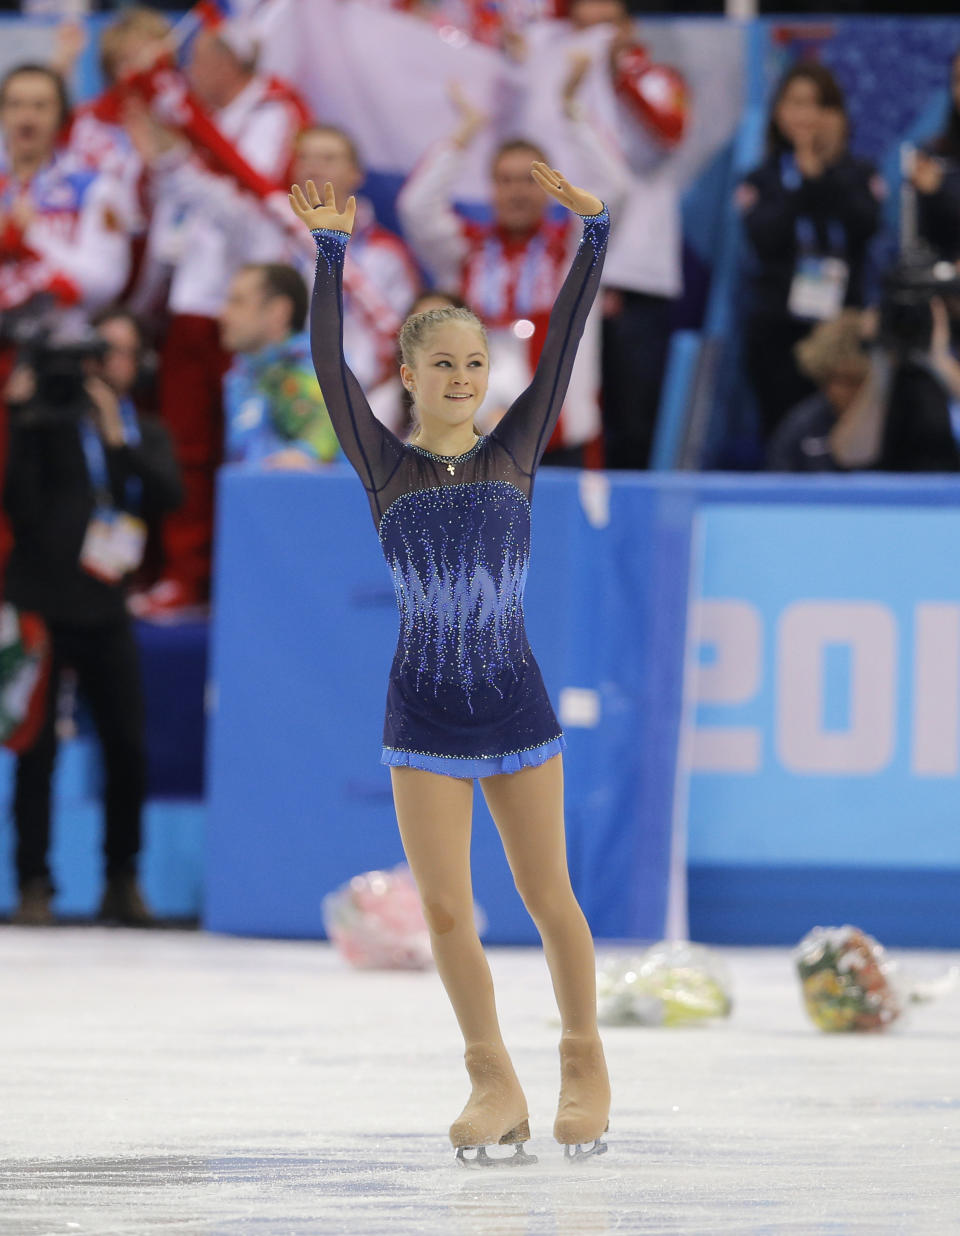 Yulia Lipnitskaya of Russia waves to spectators after competing in the women's team short program figure skating competition at the Iceberg Skating Palace during the 2014 Winter Olympics, Saturday, Feb. 8, 2014, in Sochi, Russia. (AP Photo/Vadim Ghirda)